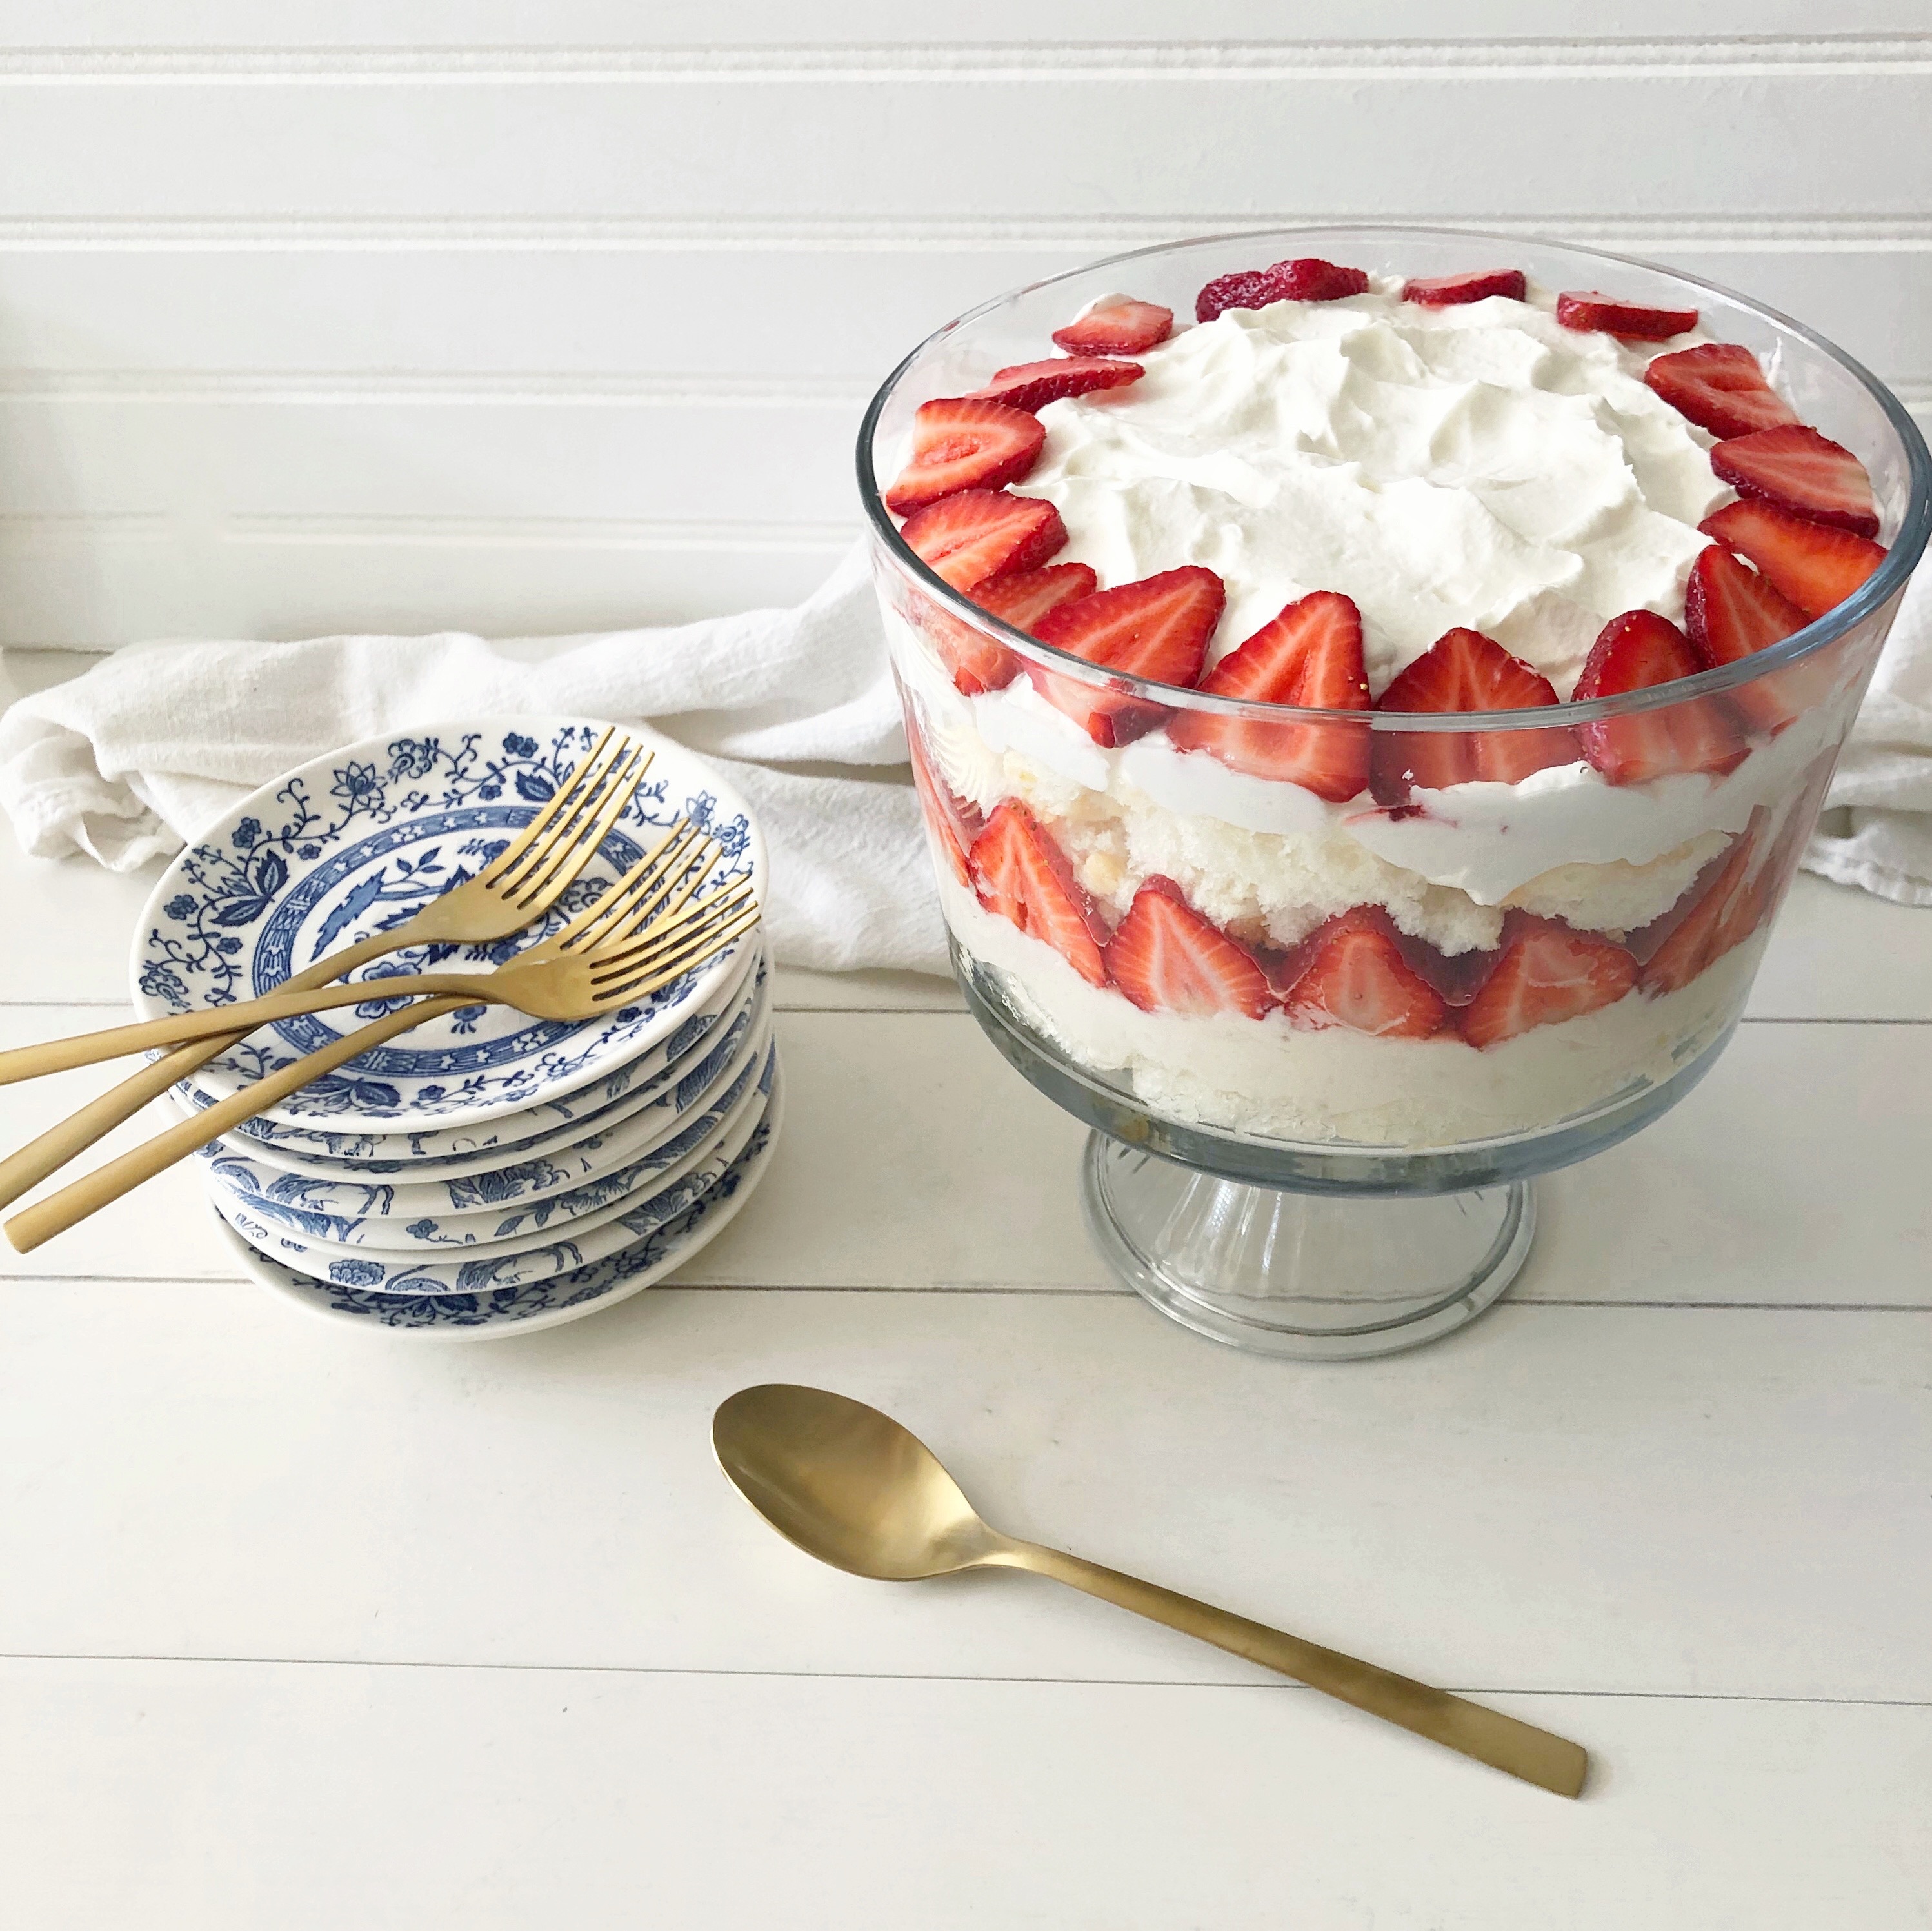 stack of blue & white plates with trifle bowl filled with strawberry lemon trifle